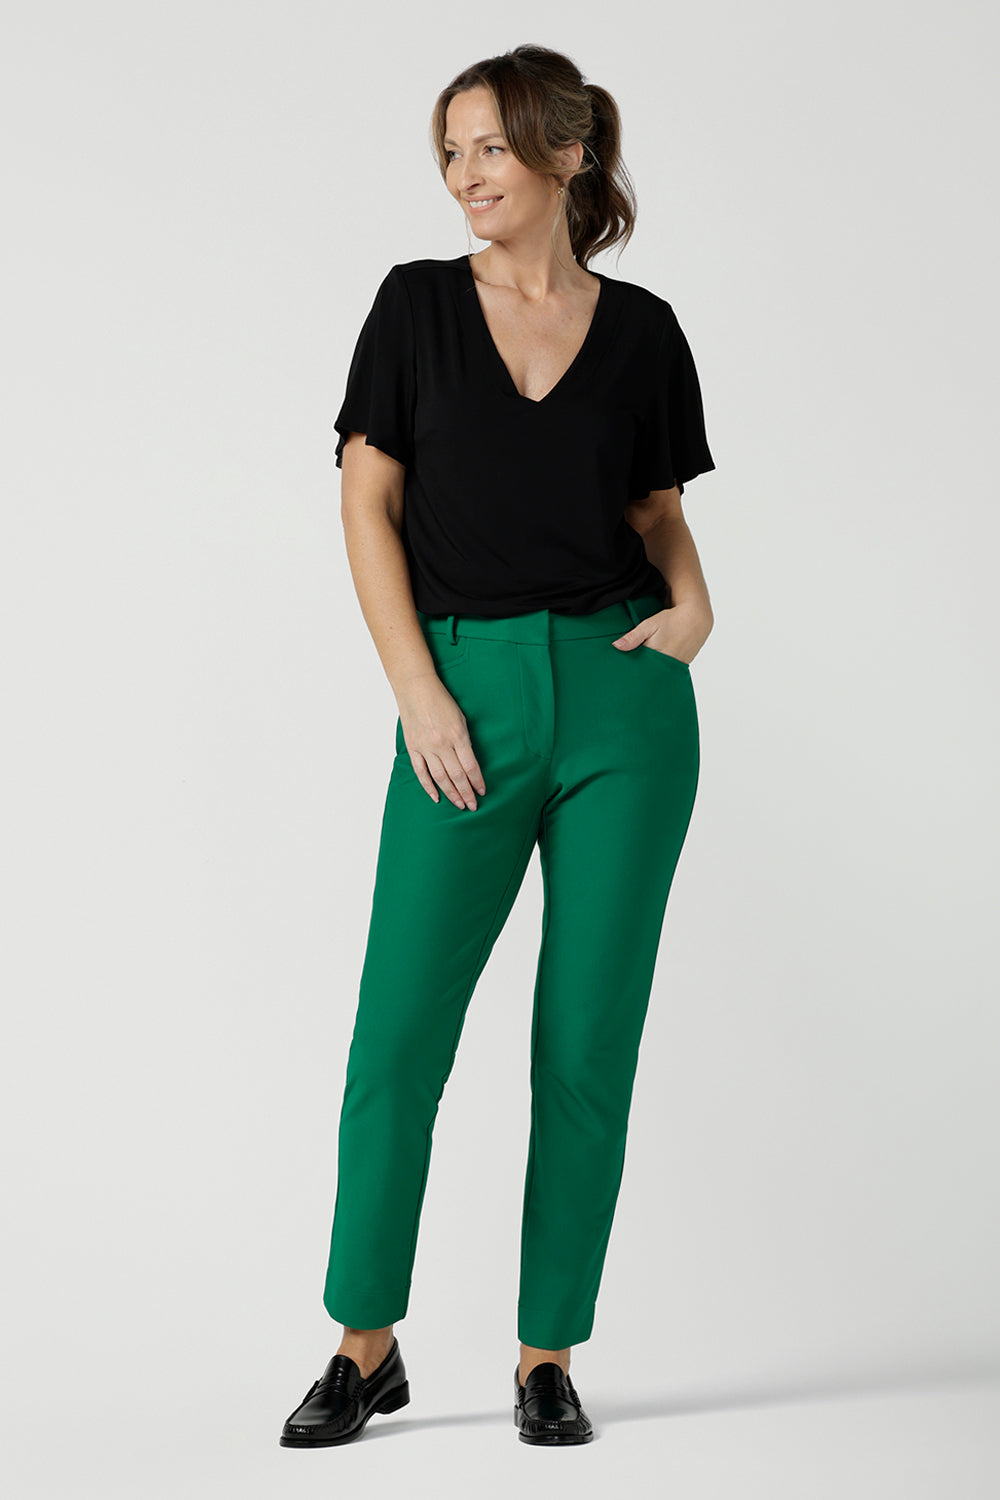 A flutter sleeve, black top for work and casual wear, this tailored top is worn by a size 10, 40 plus woman. Worn with tapered leg, green tailored pants for work, both are made in Australia. Shop women's black tops online at Australian and New Zealand women's clothing brand, Leina & Fleur.